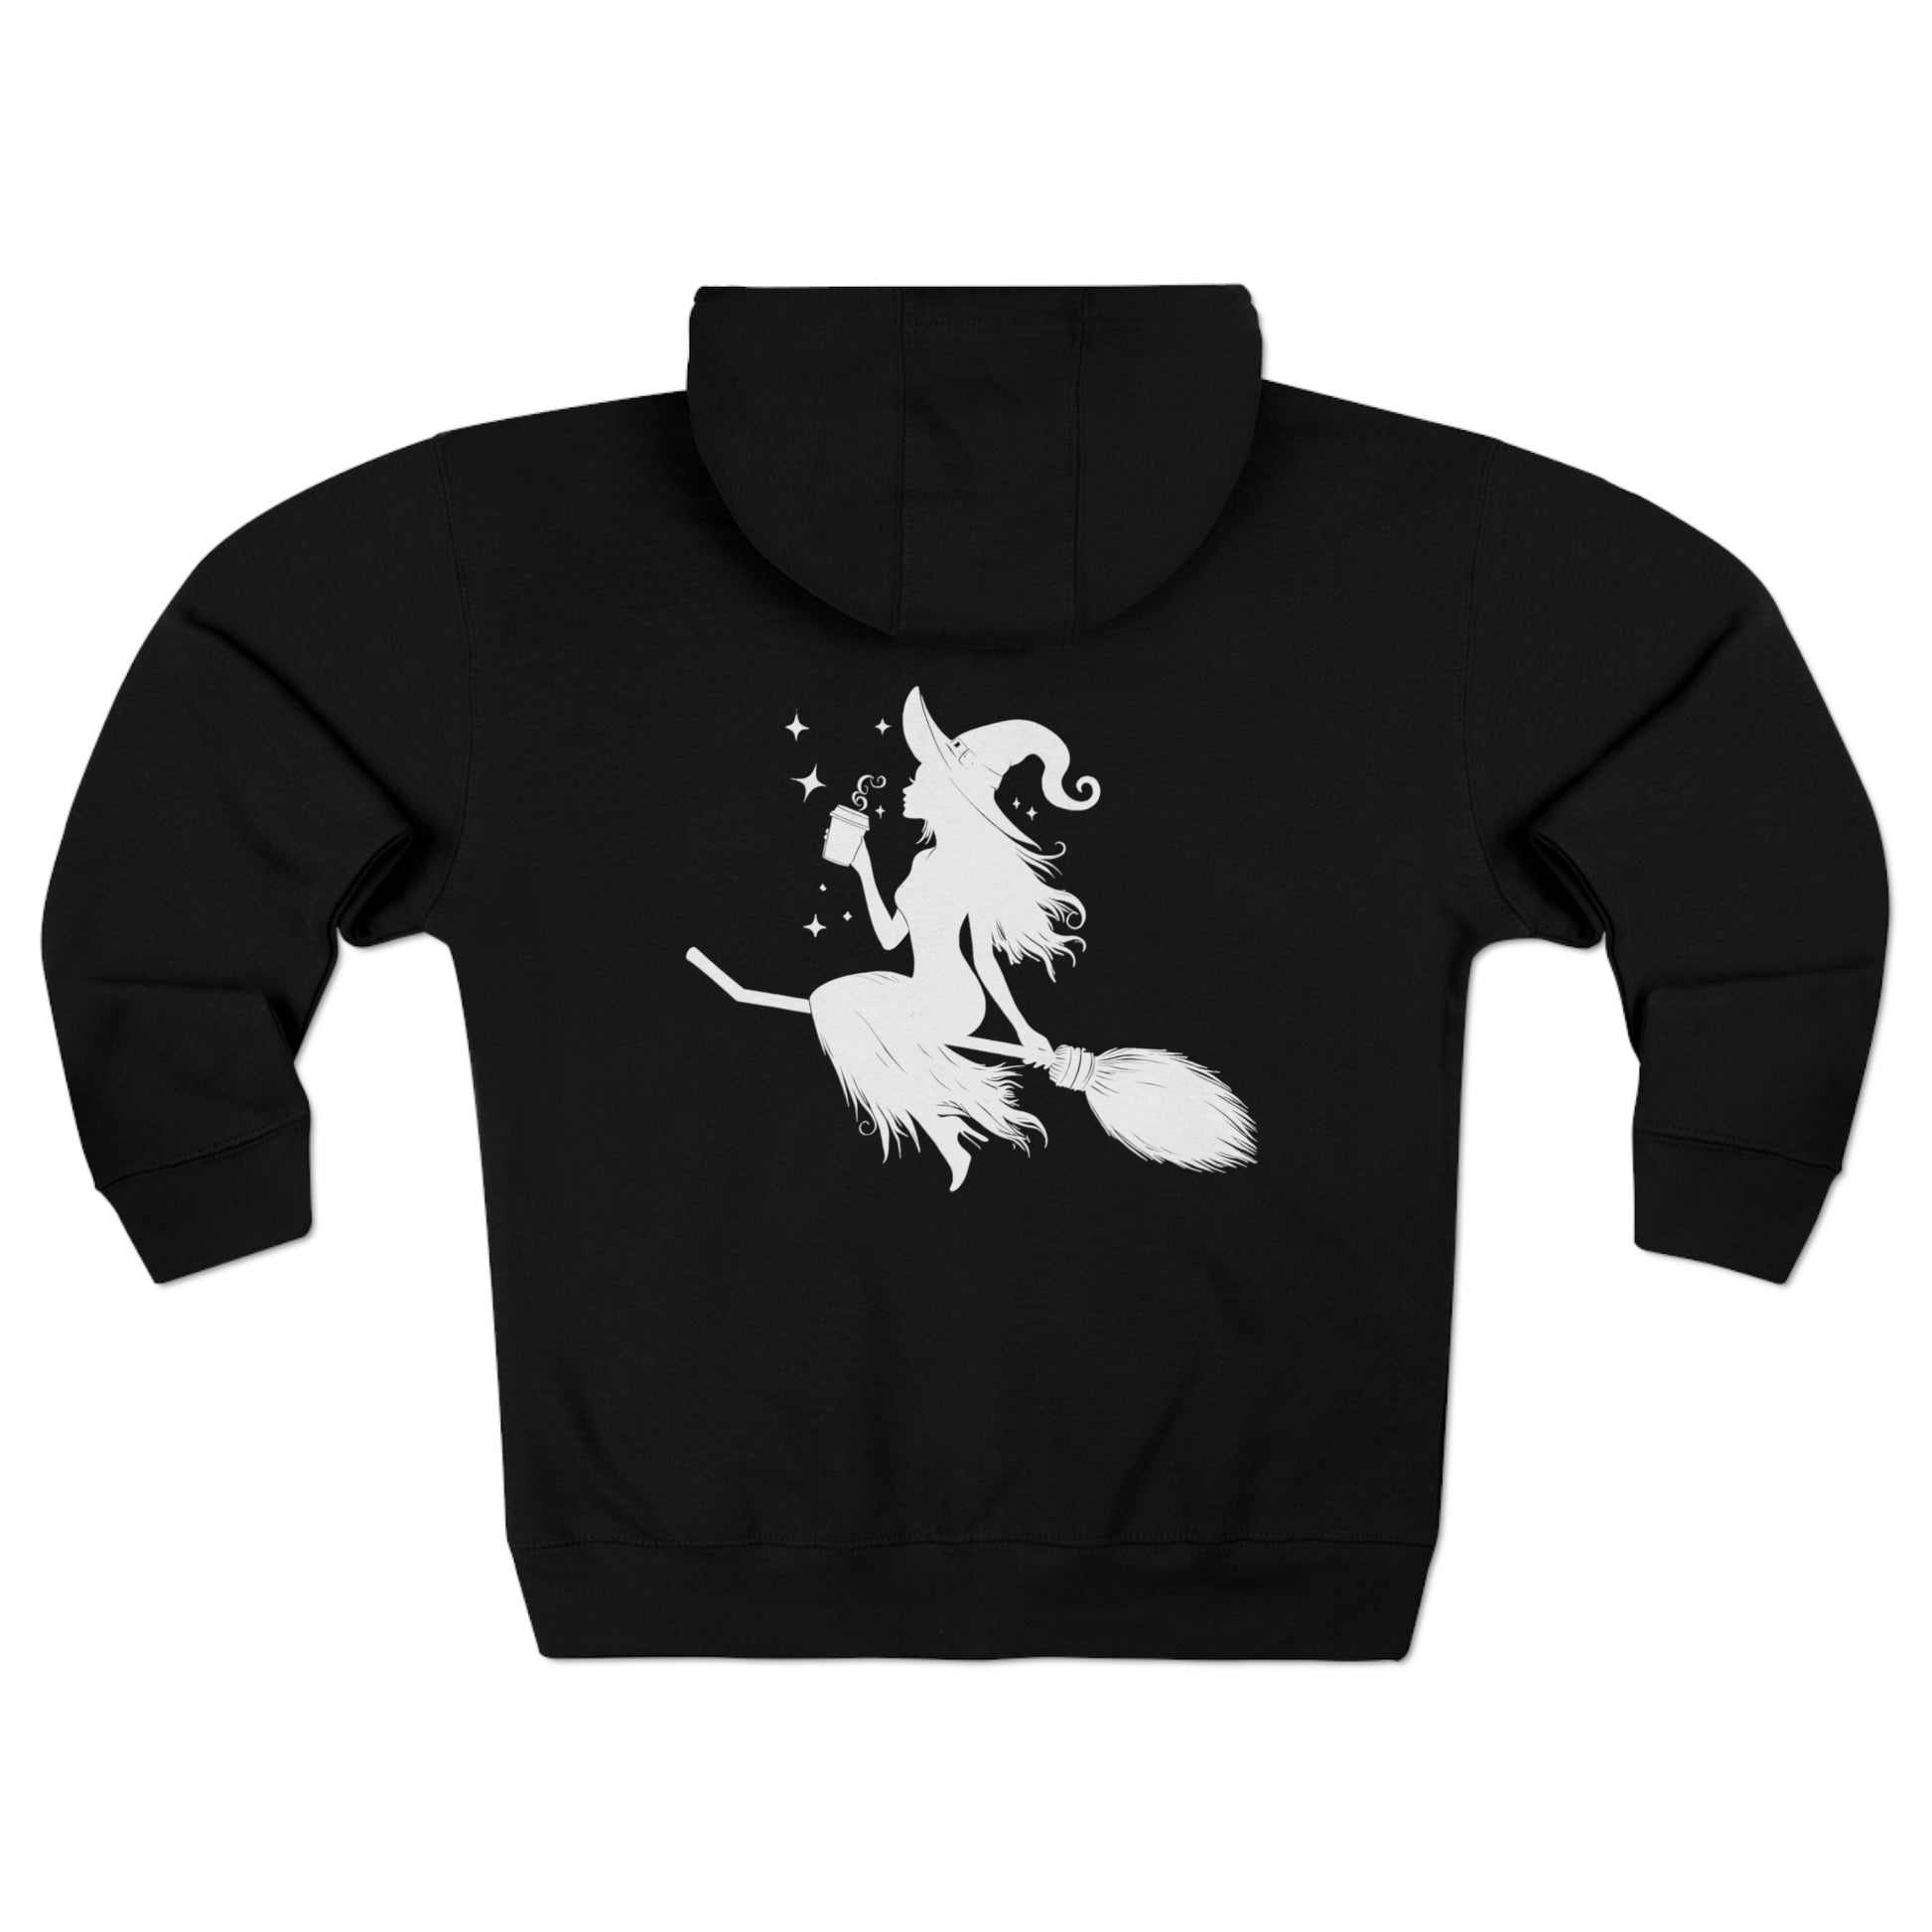 Channel your inner mystical maven with this enchanting zip-up hoodie! This cozy print features a captivating design of a silhouetted witch, clad in white, soaring through the night sky on her broomstick with a mug of coffee. Rear View.